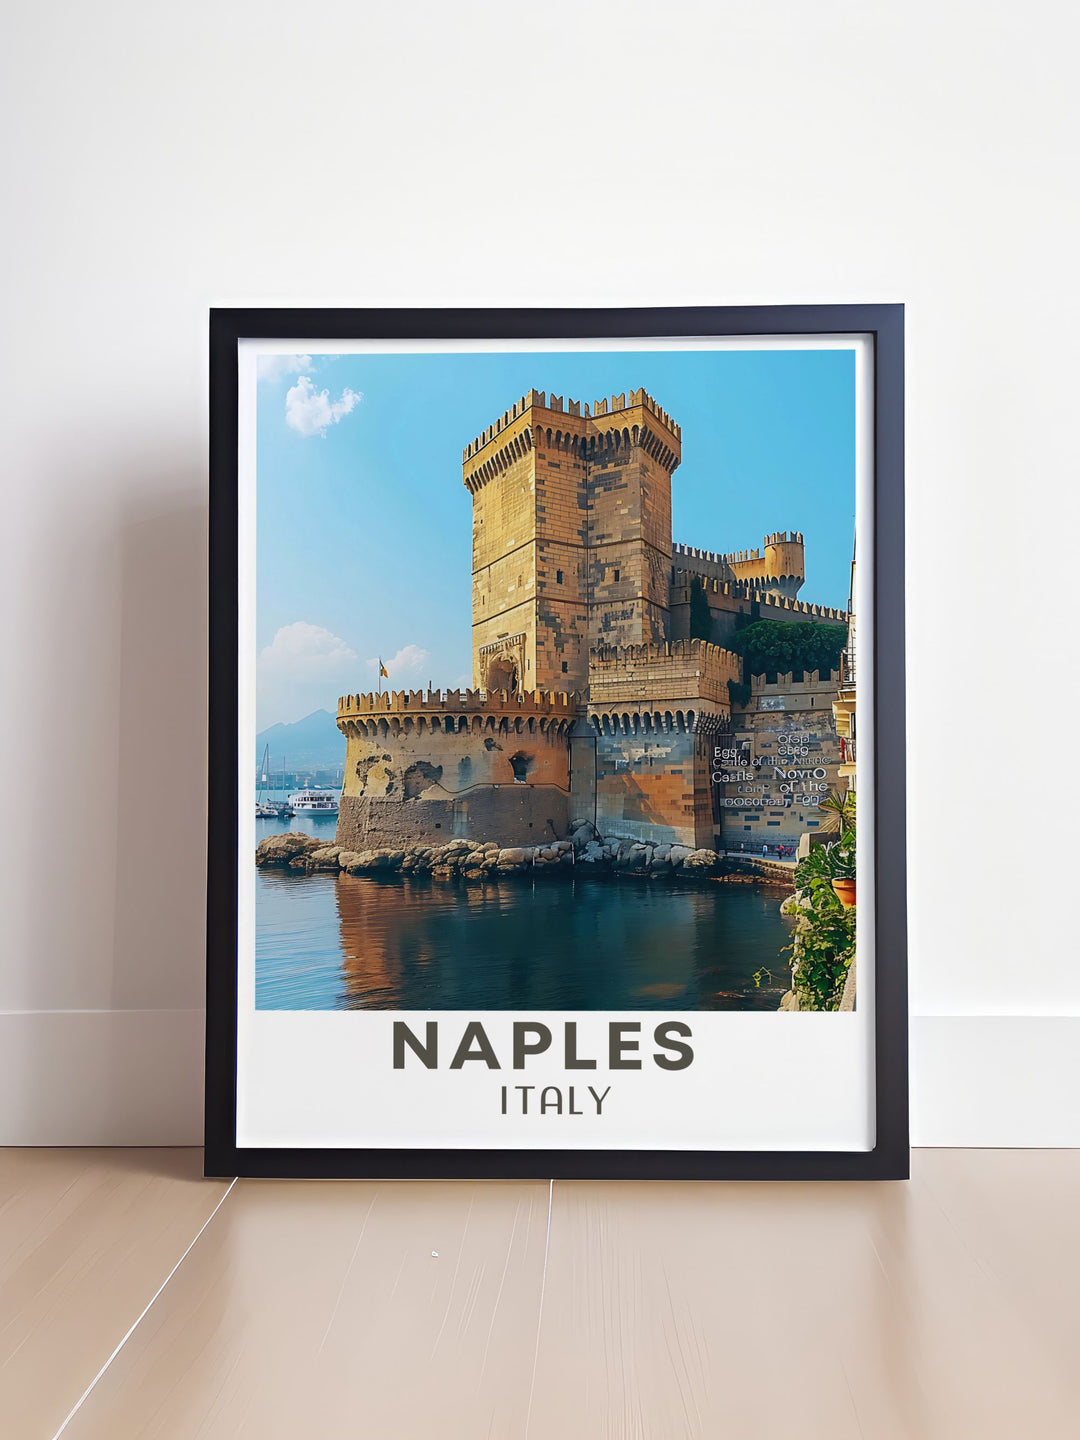 NAPLES Travel Poster featuring the iconic skyline of Naples Italy with Castel dellOvo. A wonderful addition to any wall art collection. Perfect for those who appreciate Italys historic landmarks and scenic beauty.